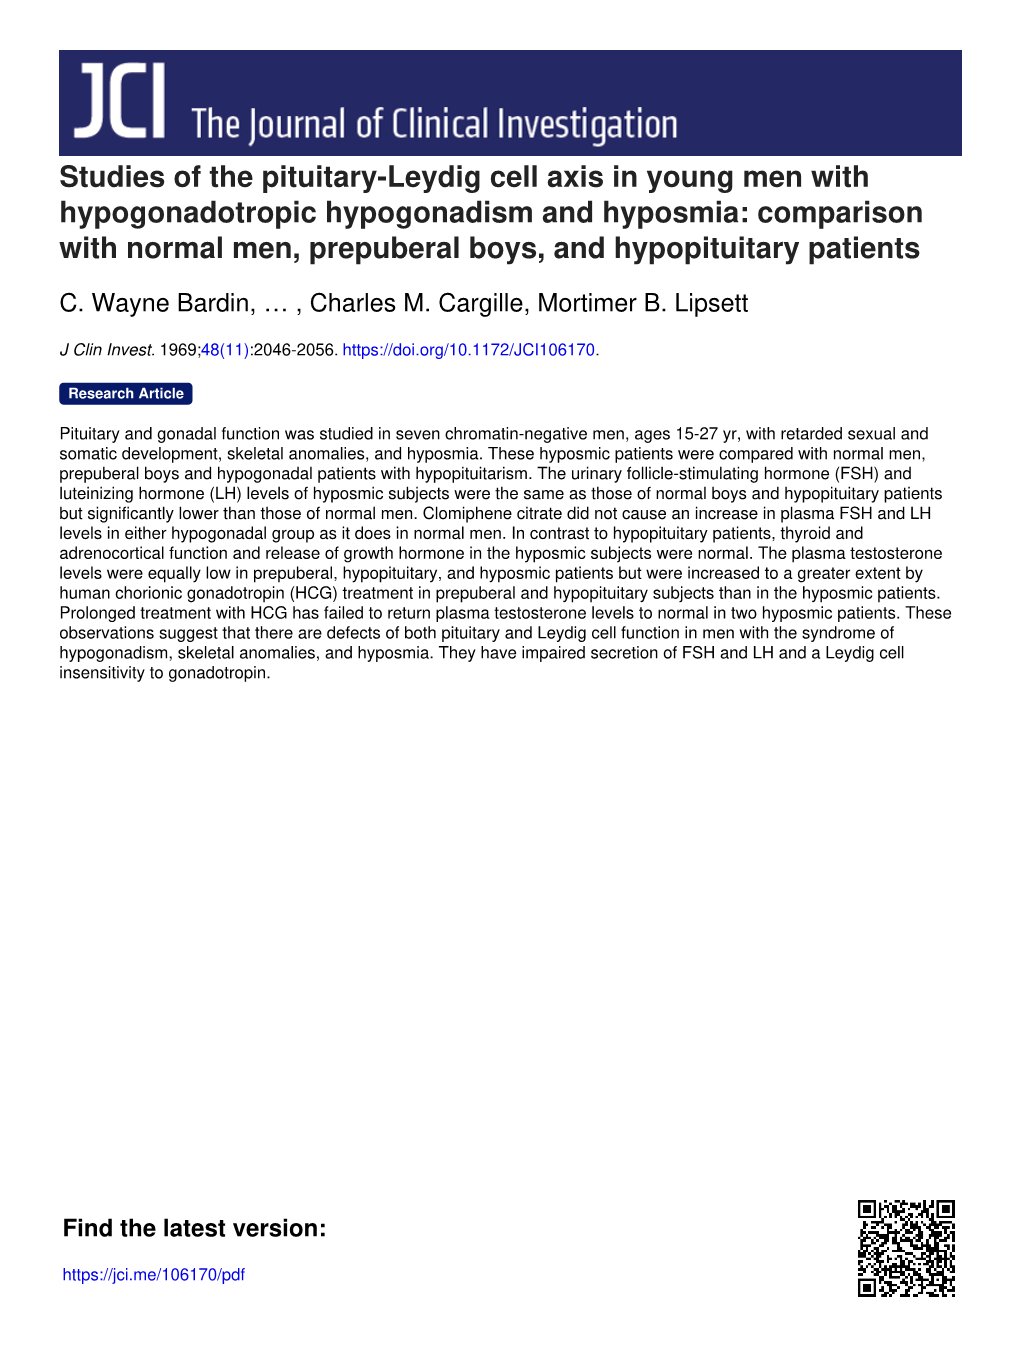 Studies of the Pituitary-Leydig Cell Axis in Young Men with Hypogonadotropic Hypogonadism and Hyposmia